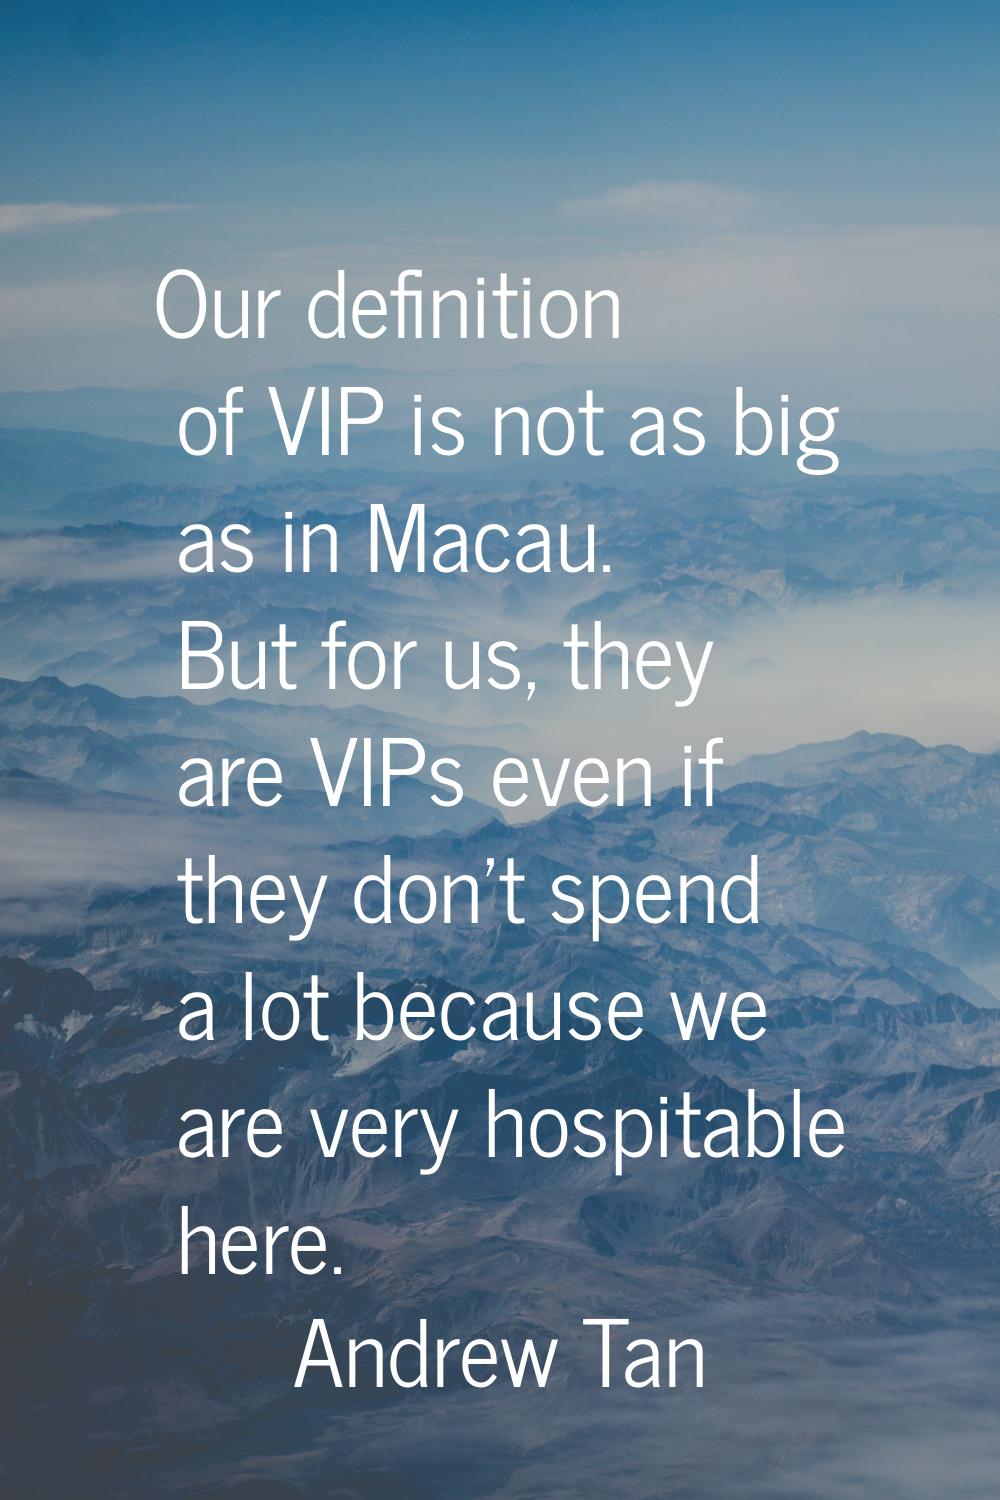 Our definition of VIP is not as big as in Macau. But for us, they are VIPs even if they don't spend